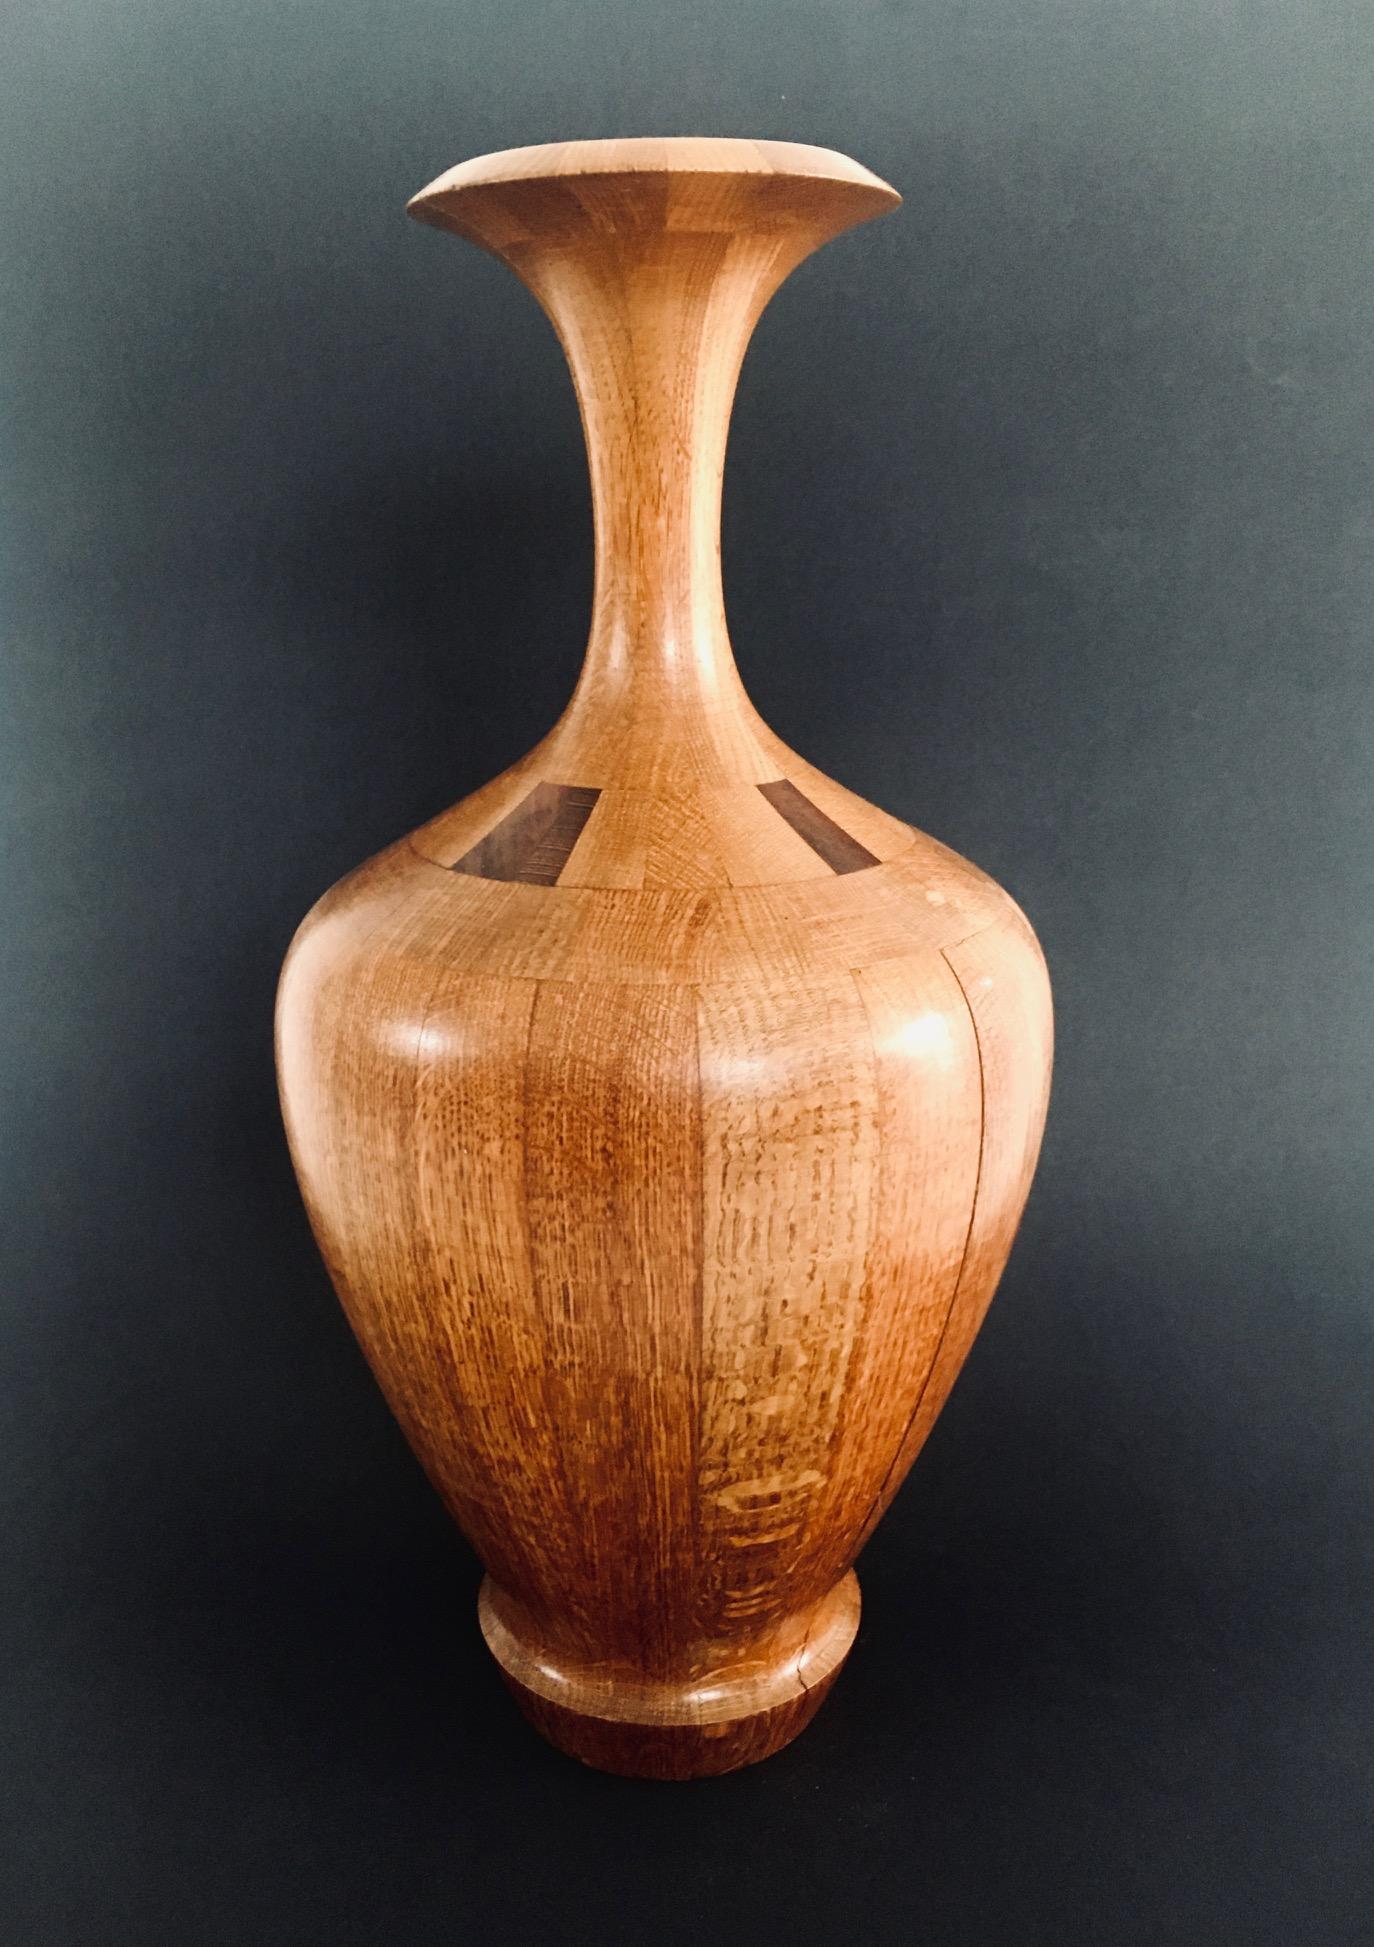 Vintage RARE Midcentury Art Vase in Hardwood by Maurice Bonami for De Coene frères. Made in Belgium 1950's. Hardwood constructed and turned large fluted trumpet shape vase. Stamped on the bottom with reference number in pencil PC 8755. In overal